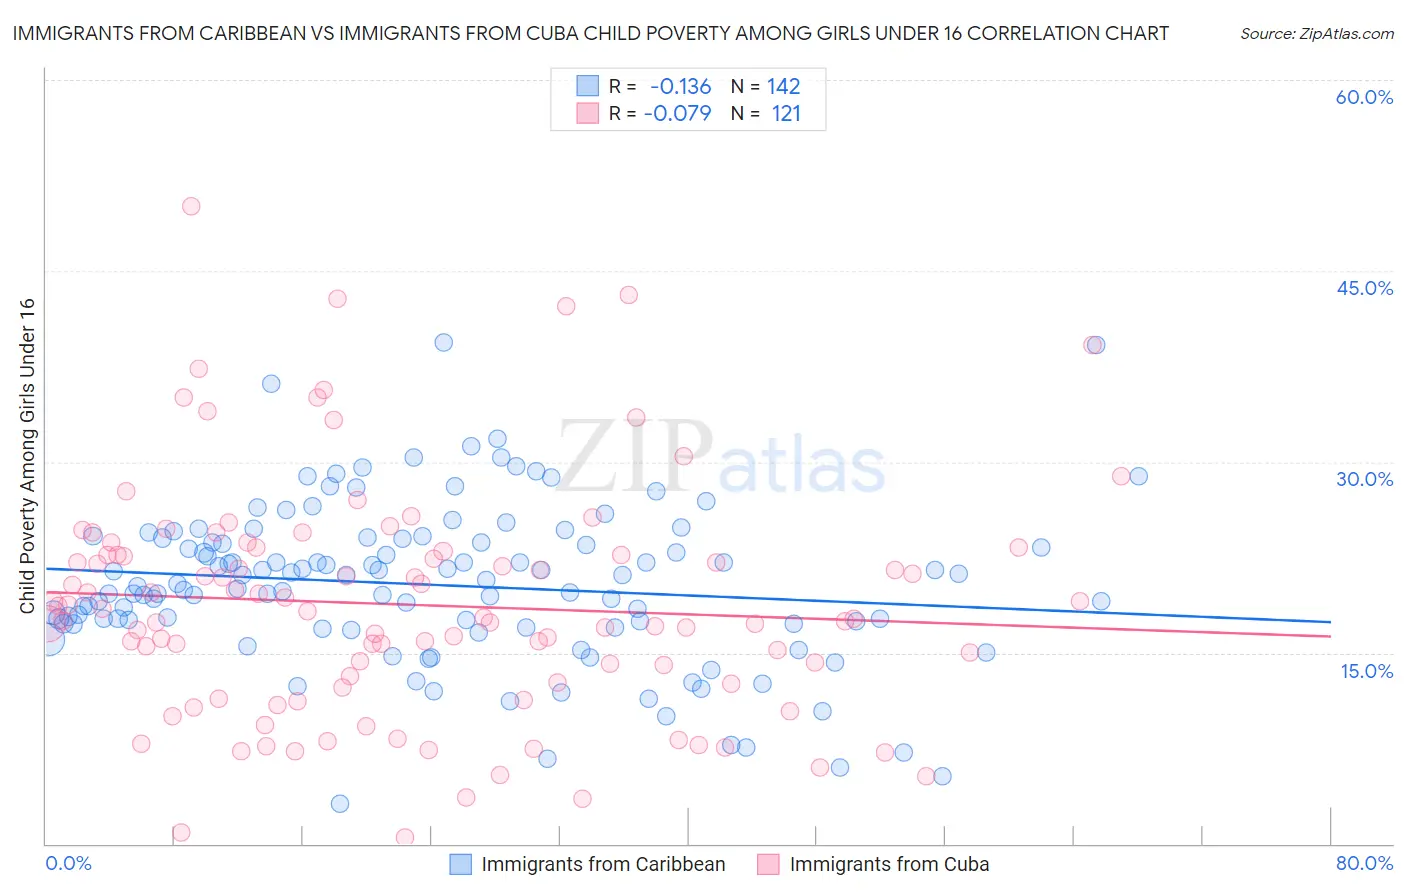 Immigrants from Caribbean vs Immigrants from Cuba Child Poverty Among Girls Under 16